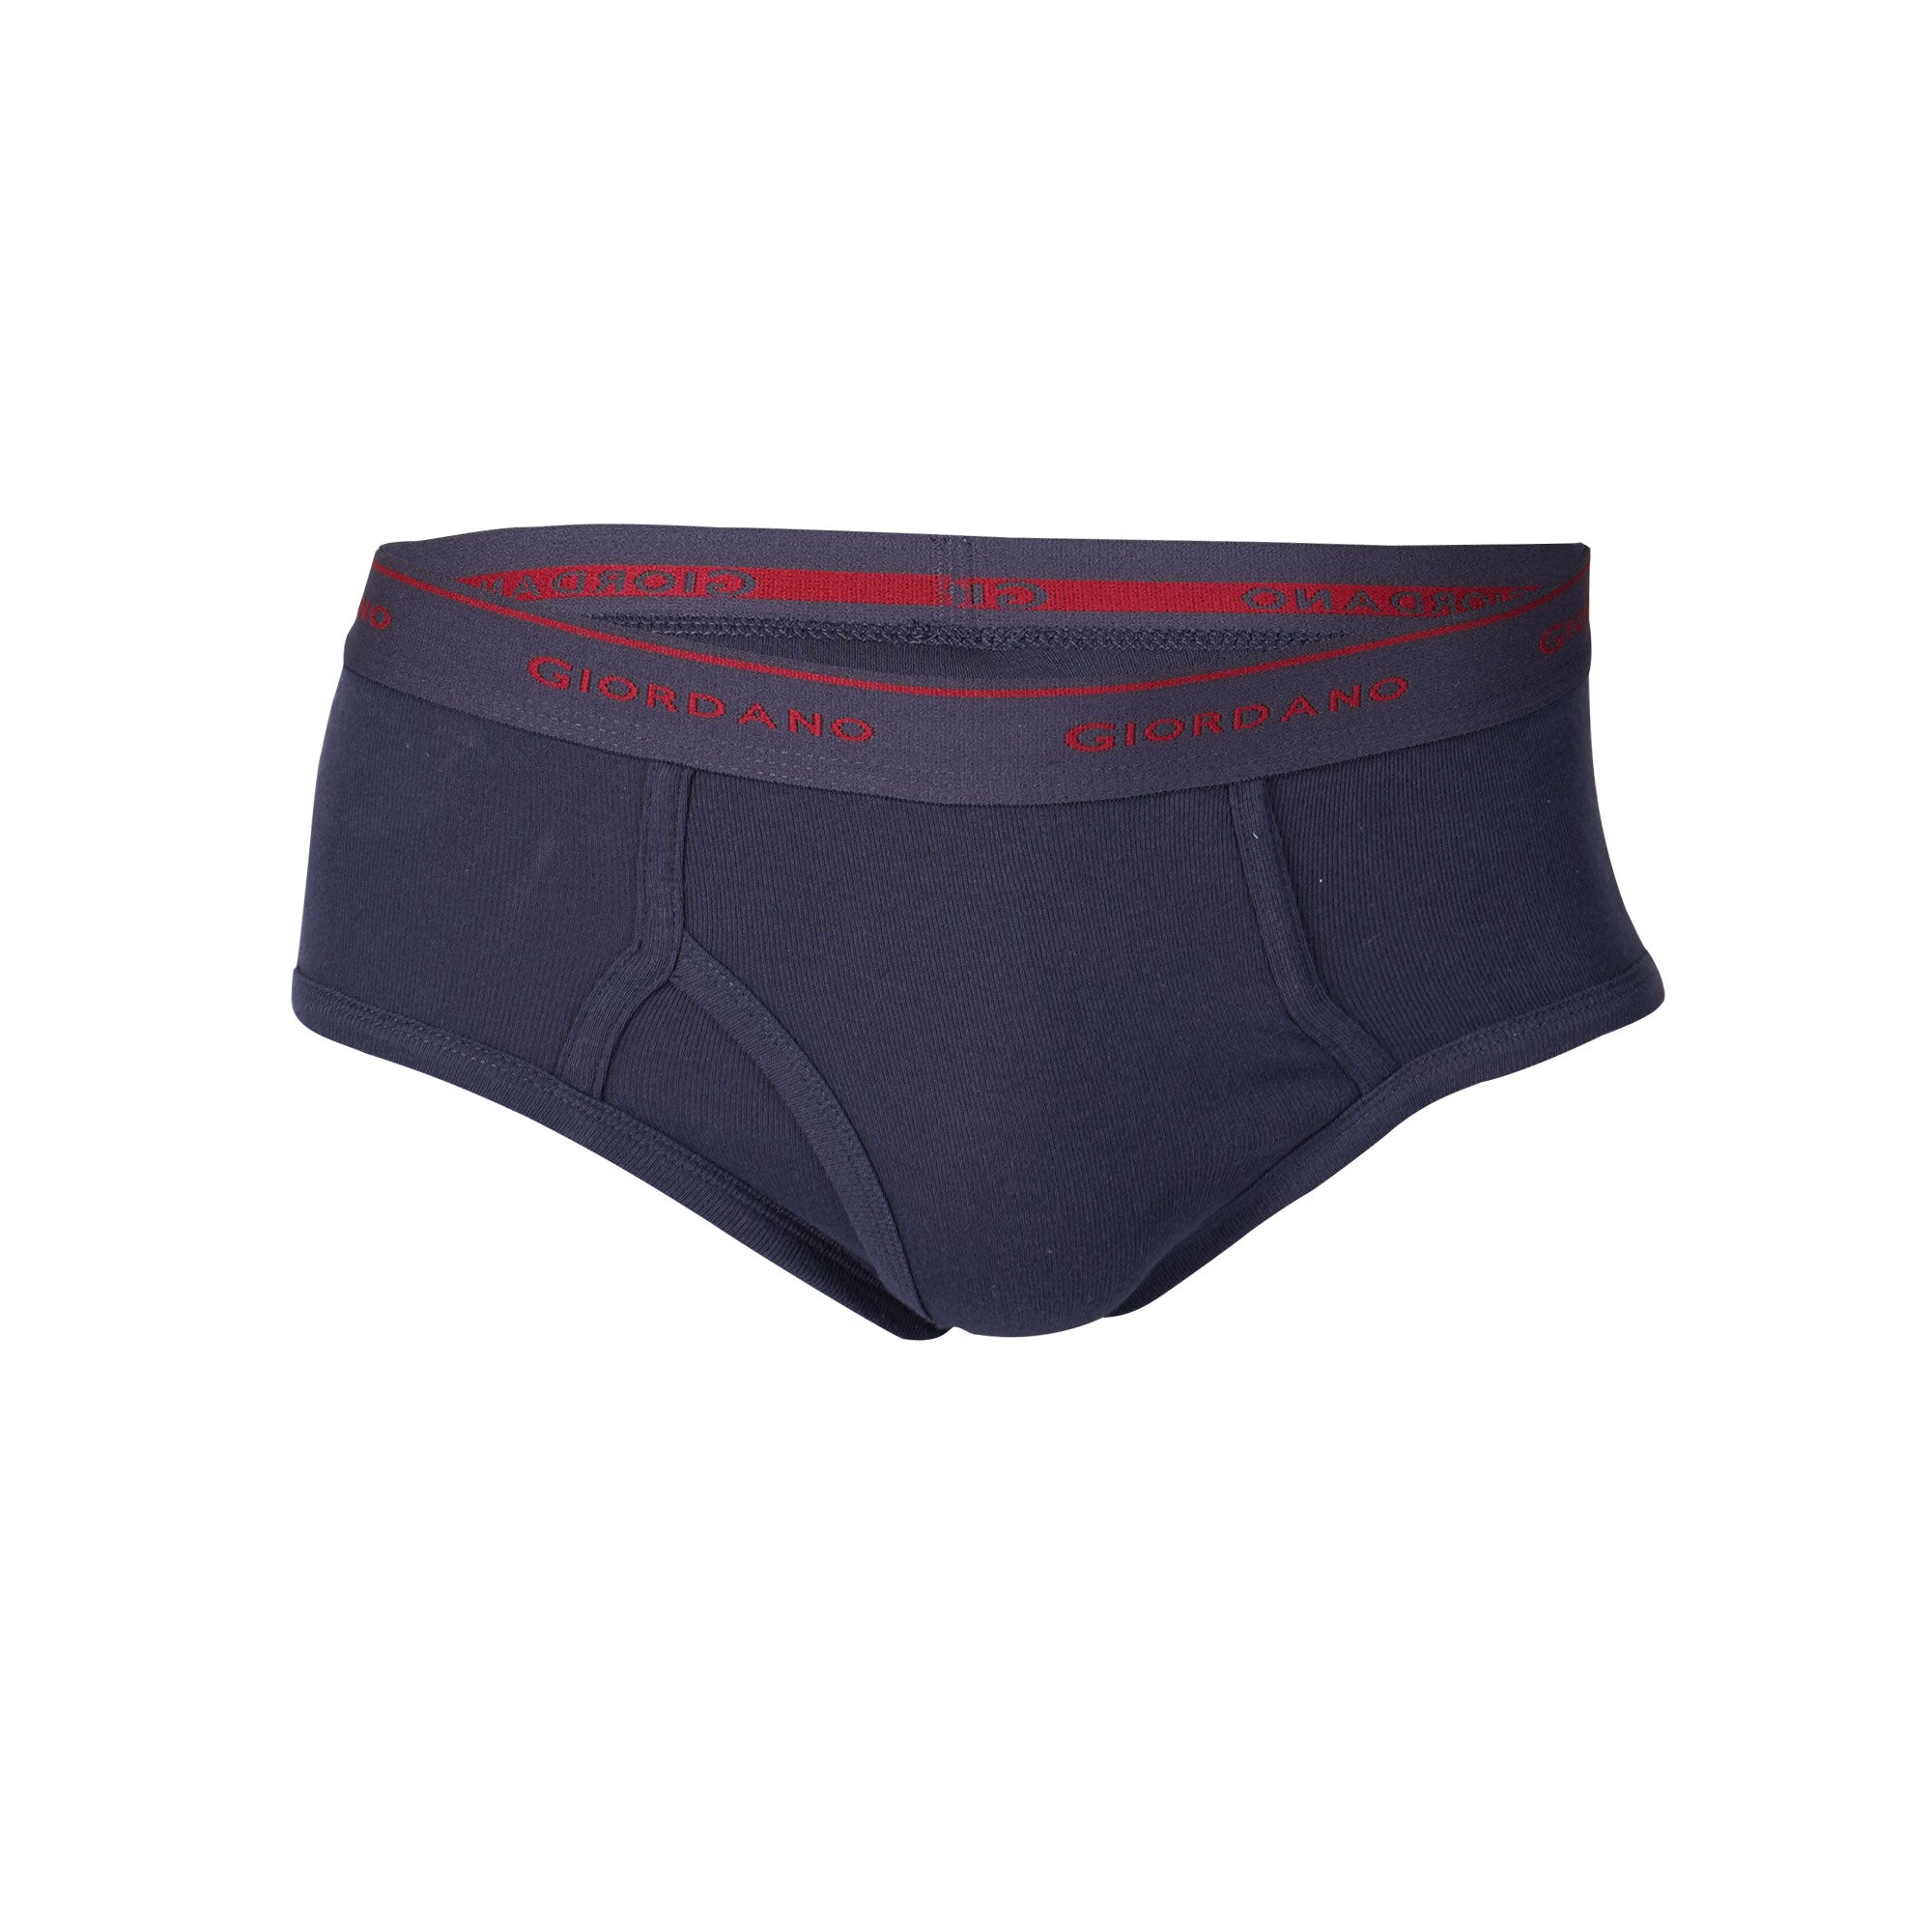 (BUY 2 GET 1 FREE )  Giordano Active fit Men's Basic Cotton Brief